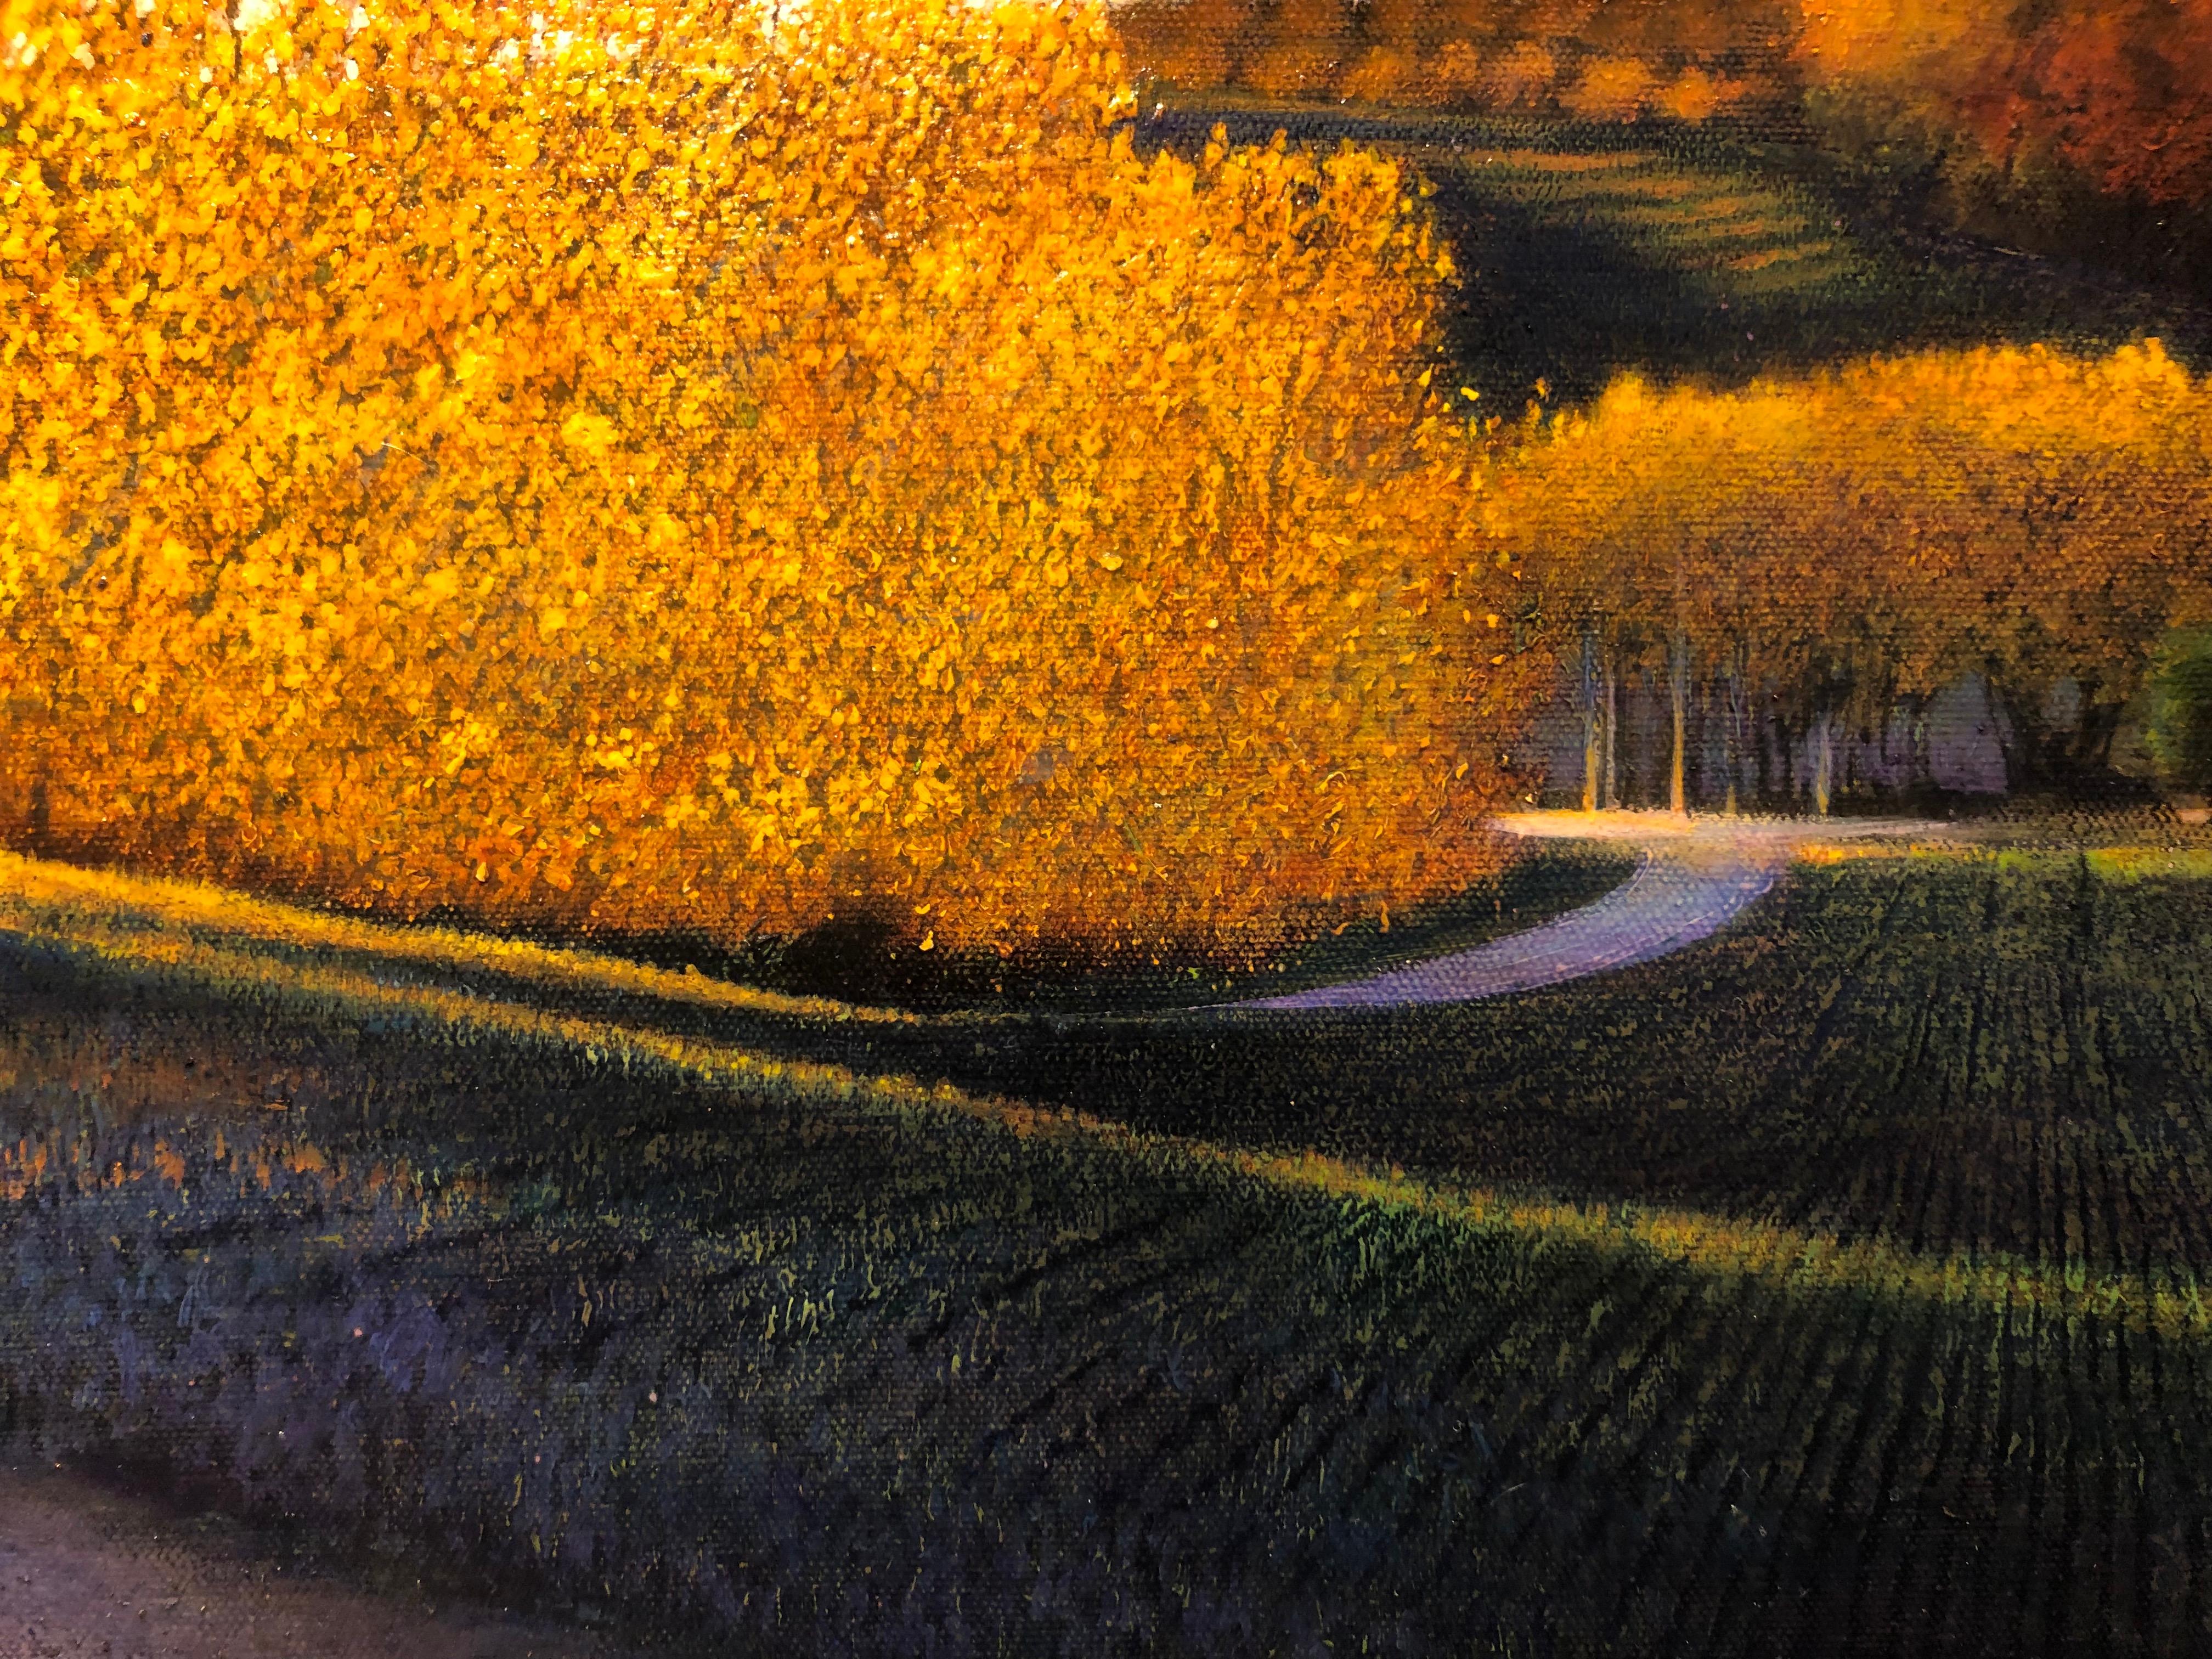 The Color of Home, Original Oil Painting, Glowing Autumn Foliage on Country Road 9